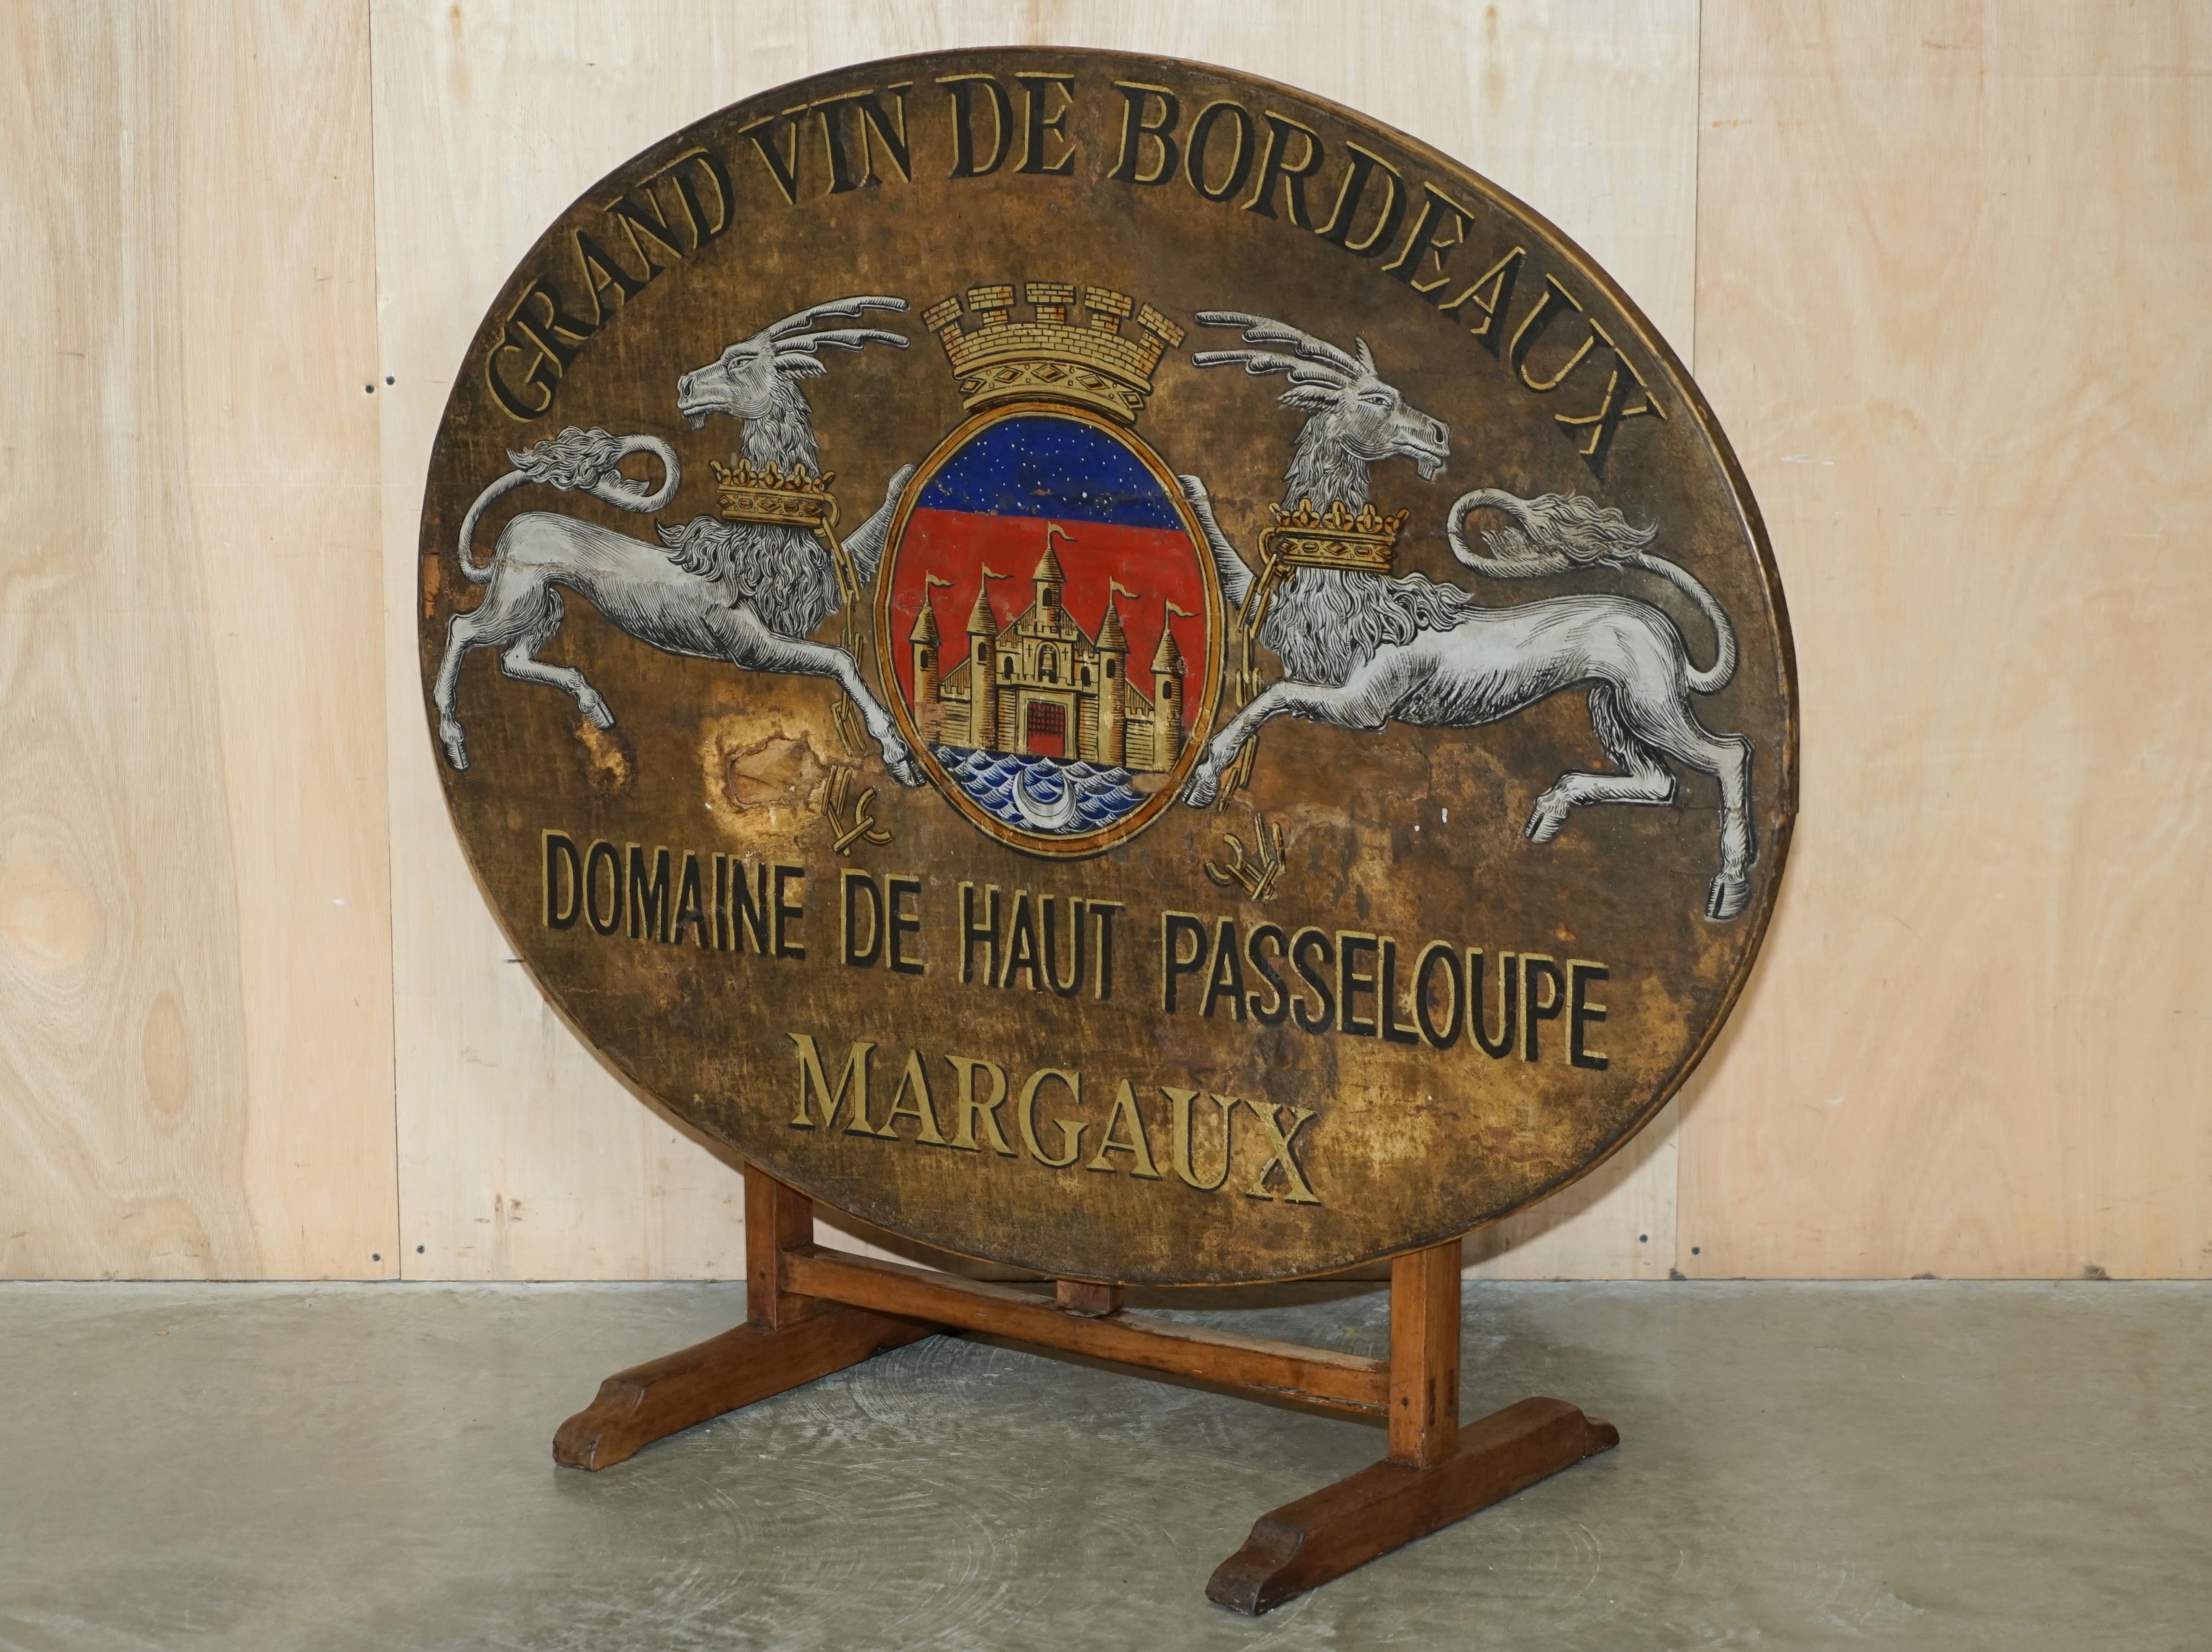 Royal House Antiques

Royal House Antiques is delighted to offer for sale this absolutely exquisite original circa 1860 Vendange Wine tasting, tilt top table in oak with hand painted Armorial crest / coat of Arms to the top

Please note the delivery